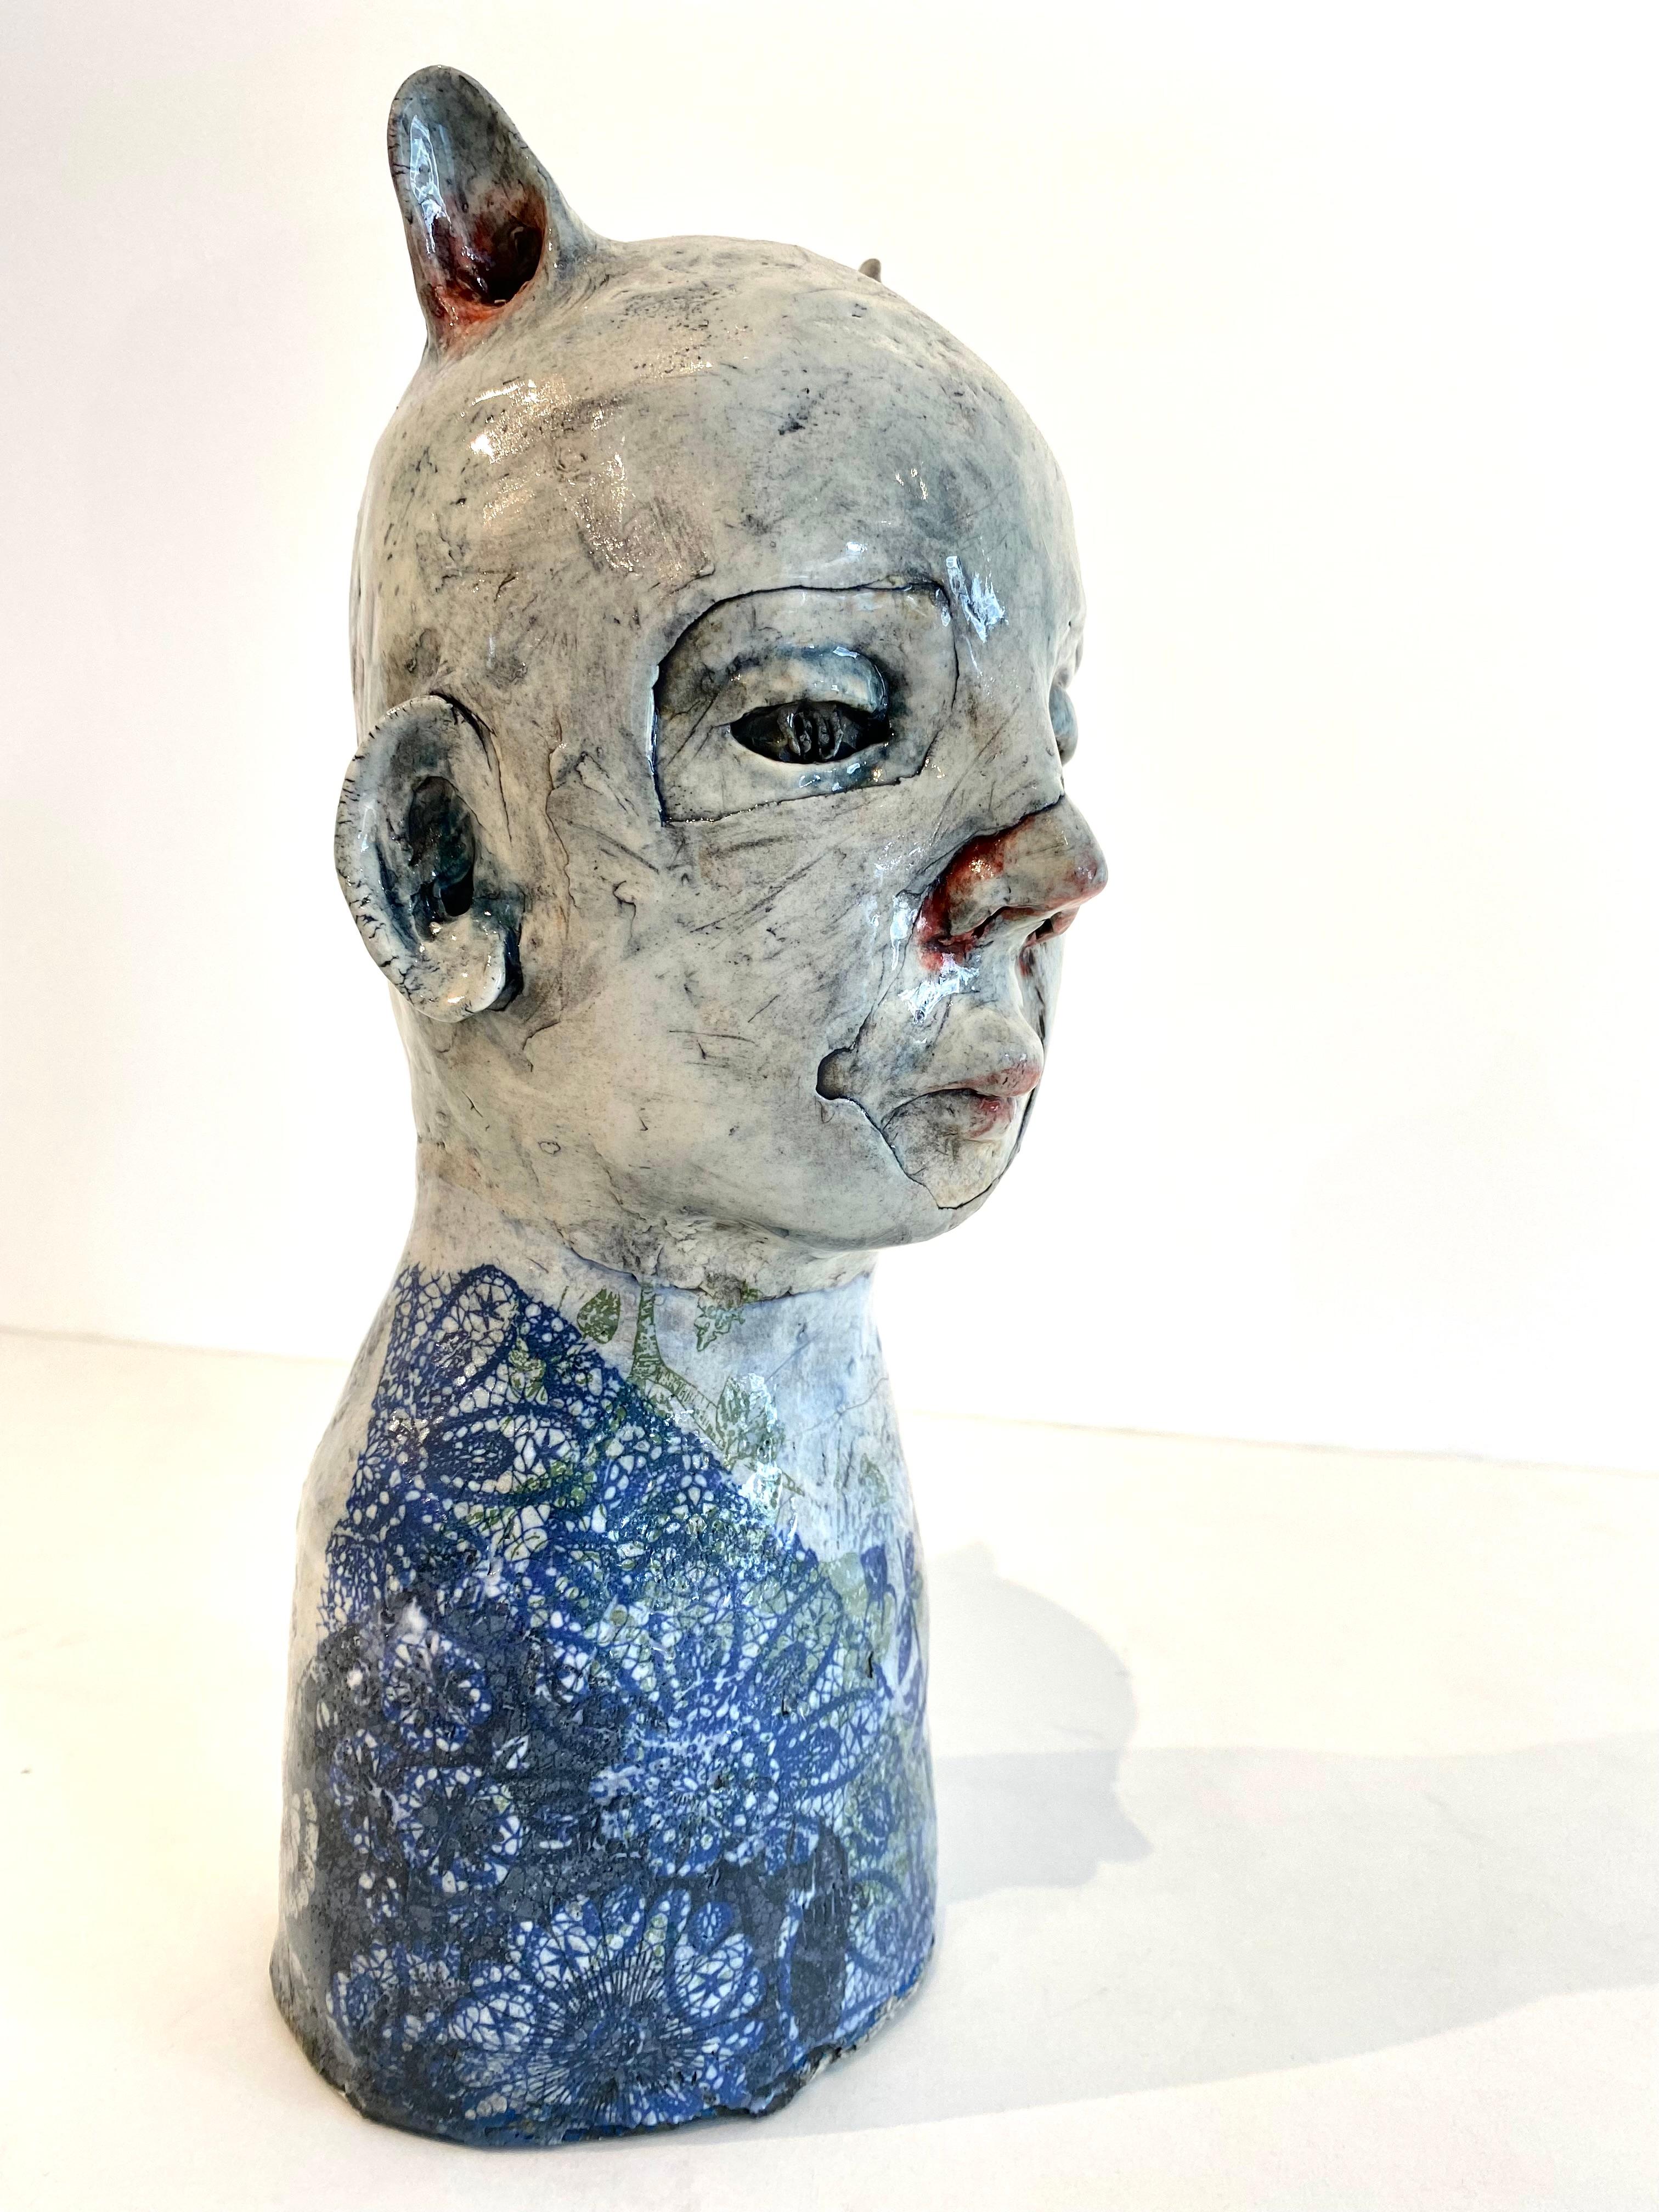 Ashley Benton Figurative Sculpture - Ceramic Bunny Person: 'He wore it so no one would see him'